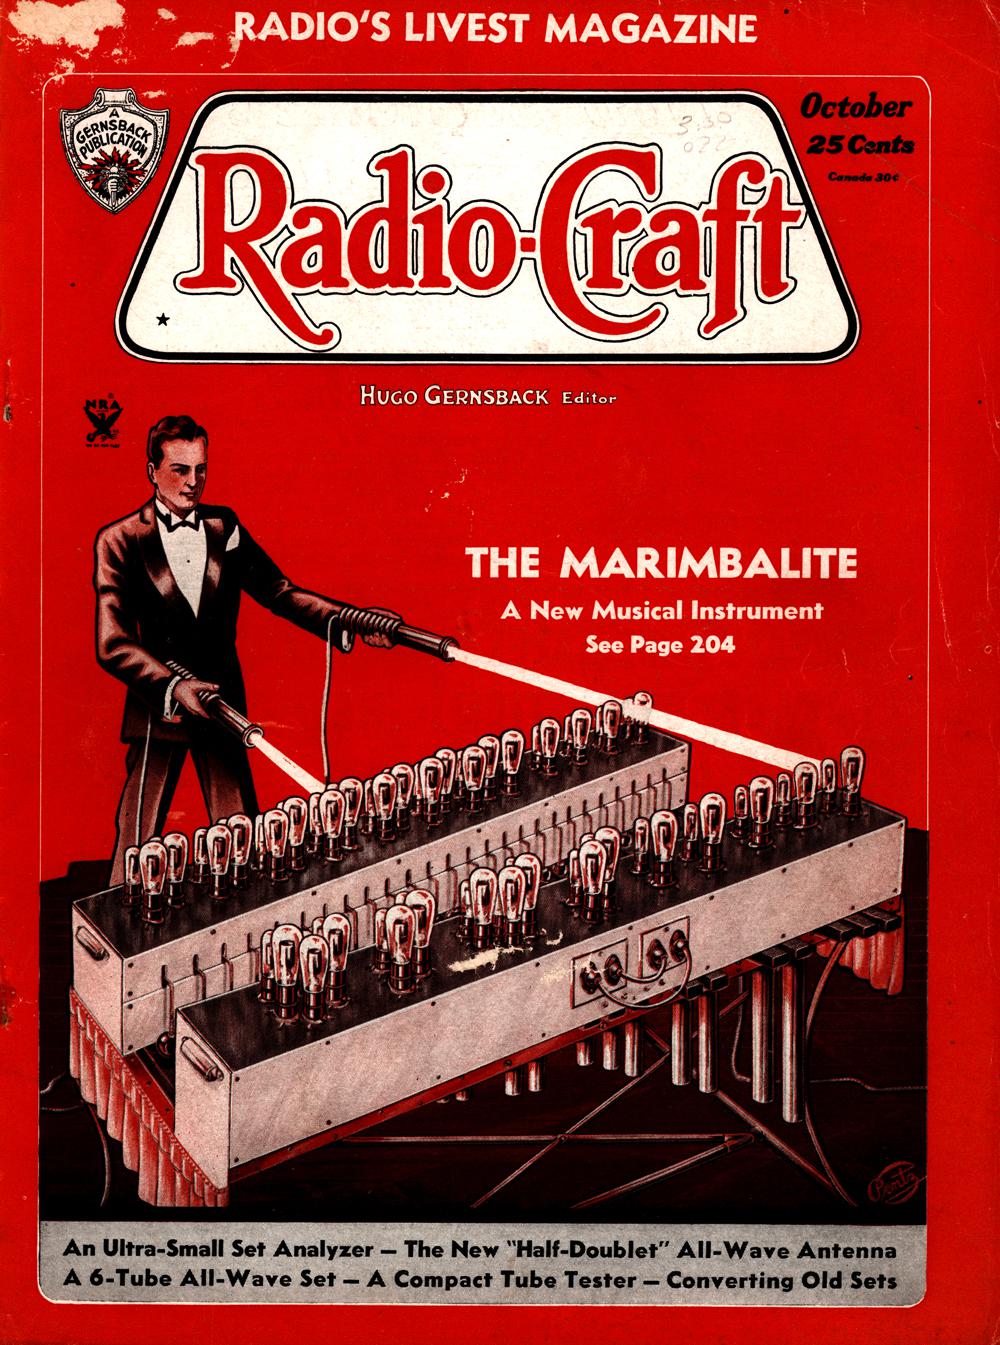 1934 - Radio-craft. and popular electronics; radio-electronics in all its phases - Vol. 6, No. 4